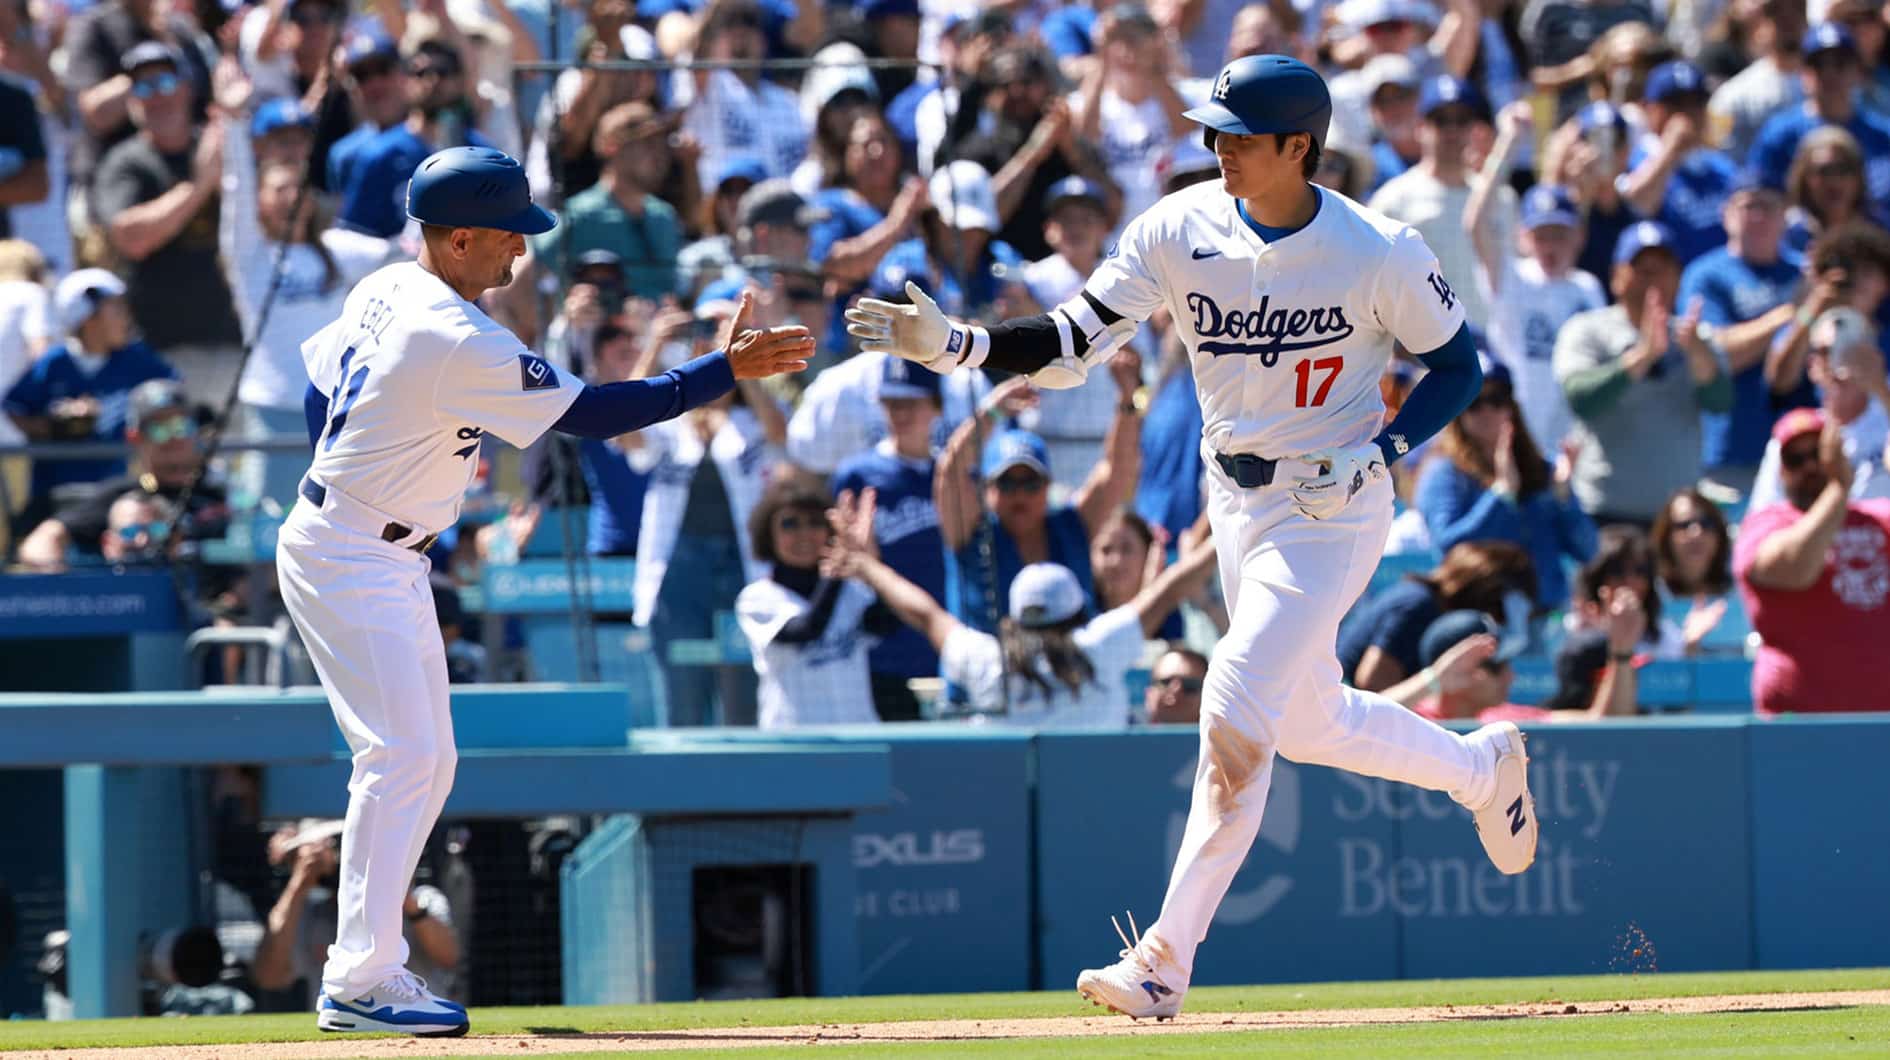 Los Angeles Dodgers designated hitter Shohei Ohtani (17) is greeted by third base coach Dino Ebel (91) after hitting a home run during the eighth inning against the Atlanta Braves at Dodger Stadium.